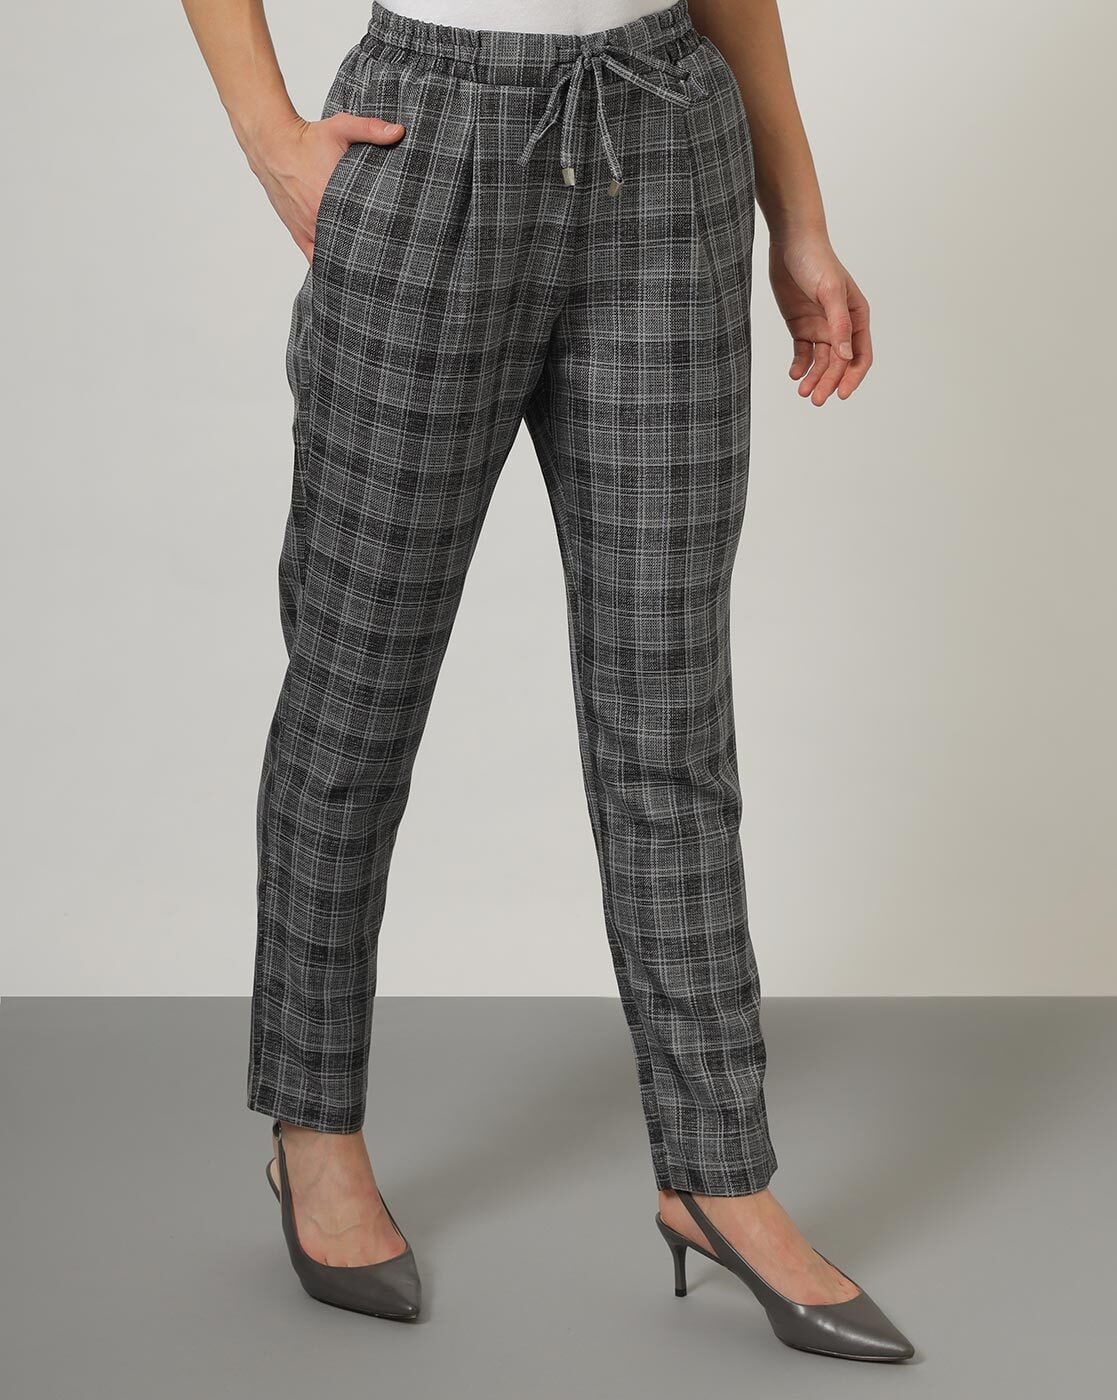 Strictly Business Black High Waisted Trouser Pants | Business casual  outfits for work, Stylish work outfits, Business outfits women